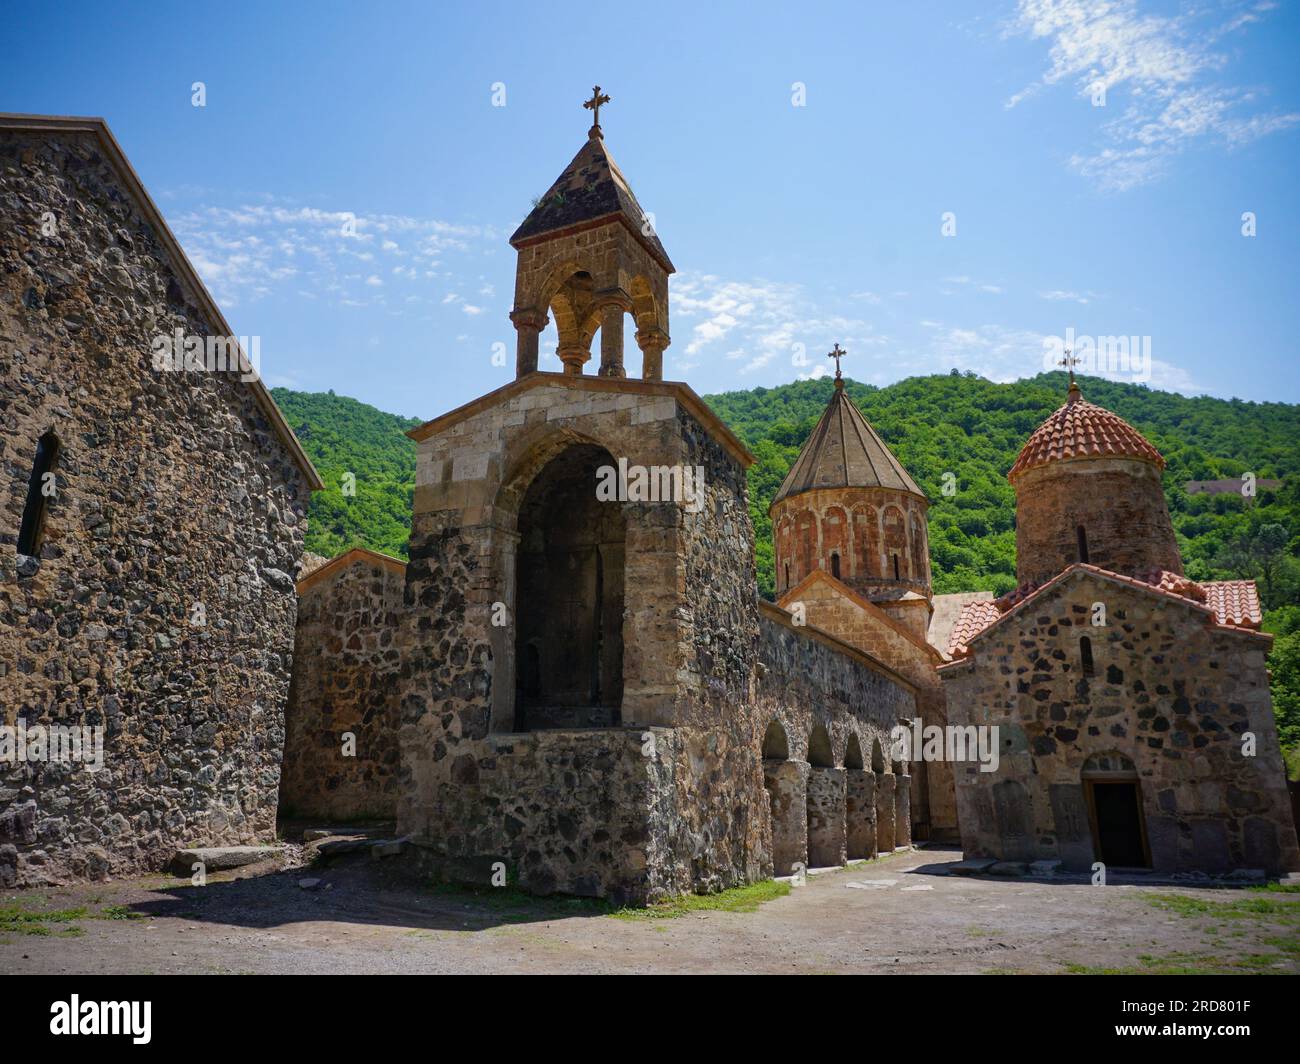 The exterior of Dadivank, an Armenian Apostolic monastery, in Kalbajar, Nagorno-Karabakh. The unrecognised yet de facto independent country in South Caucasus, Nagorno-Karabakh (also known as Artsakh) has been in the longest-running territorial dispute between Azerbaijan and Armenia in post-Soviet Eurasia since the collapse of Soviet Union. It is mainly populated by ethnic Armenians. Stock Photo